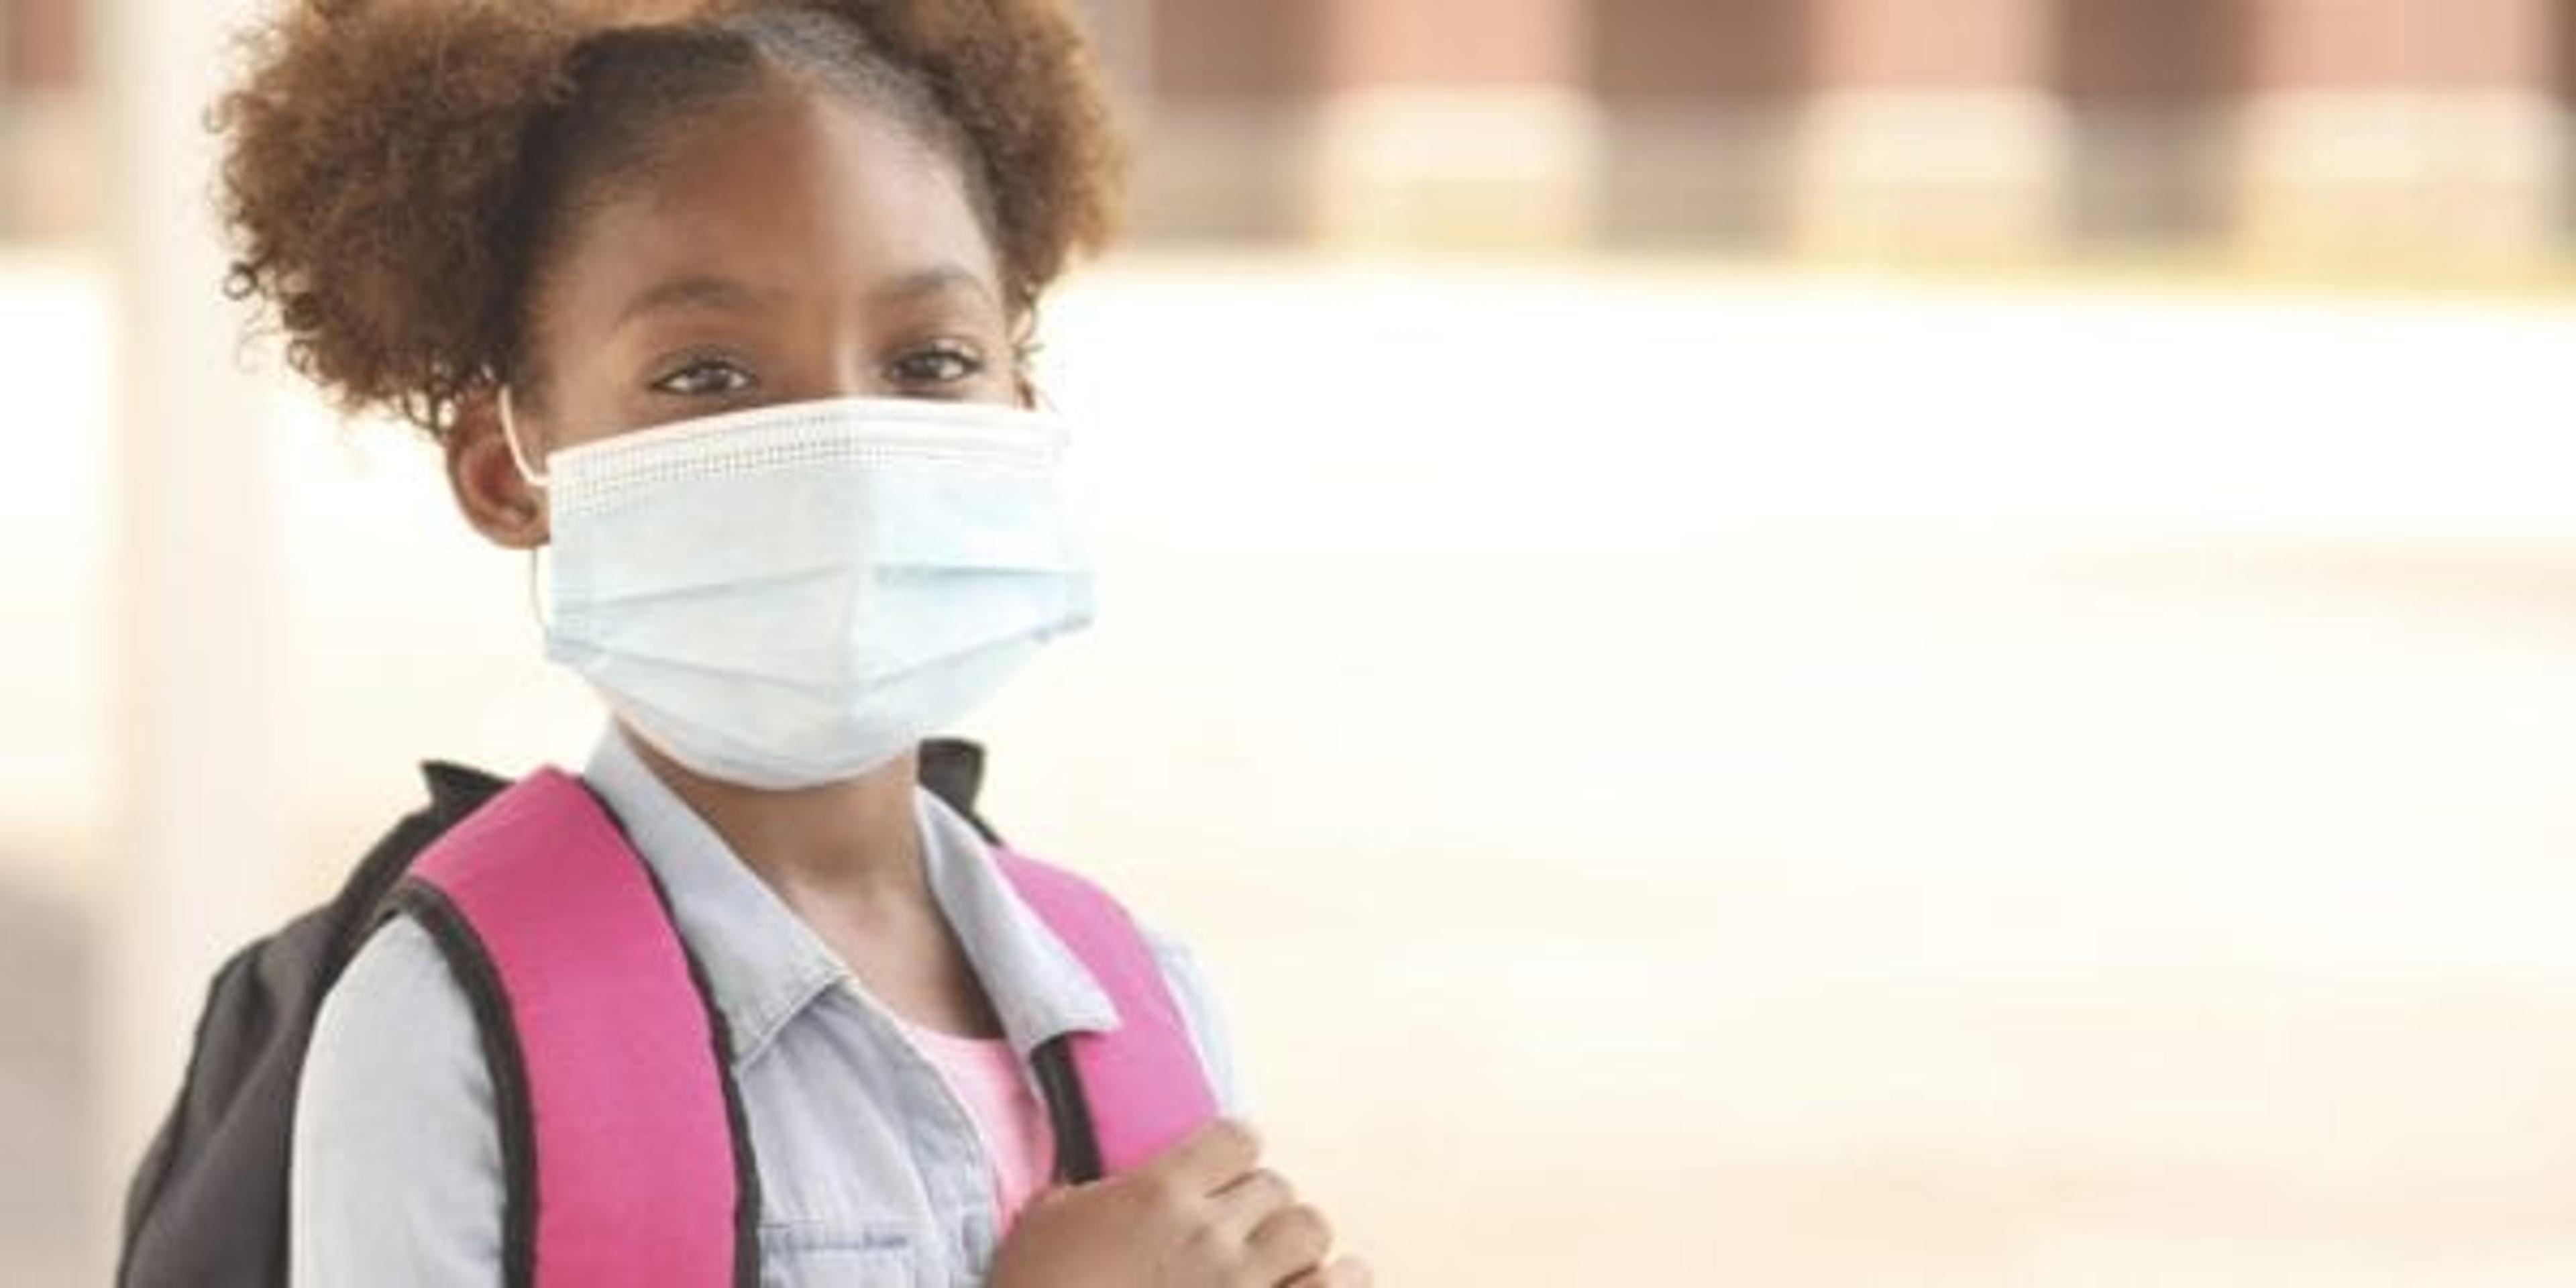 Little girl going to school with a mask on